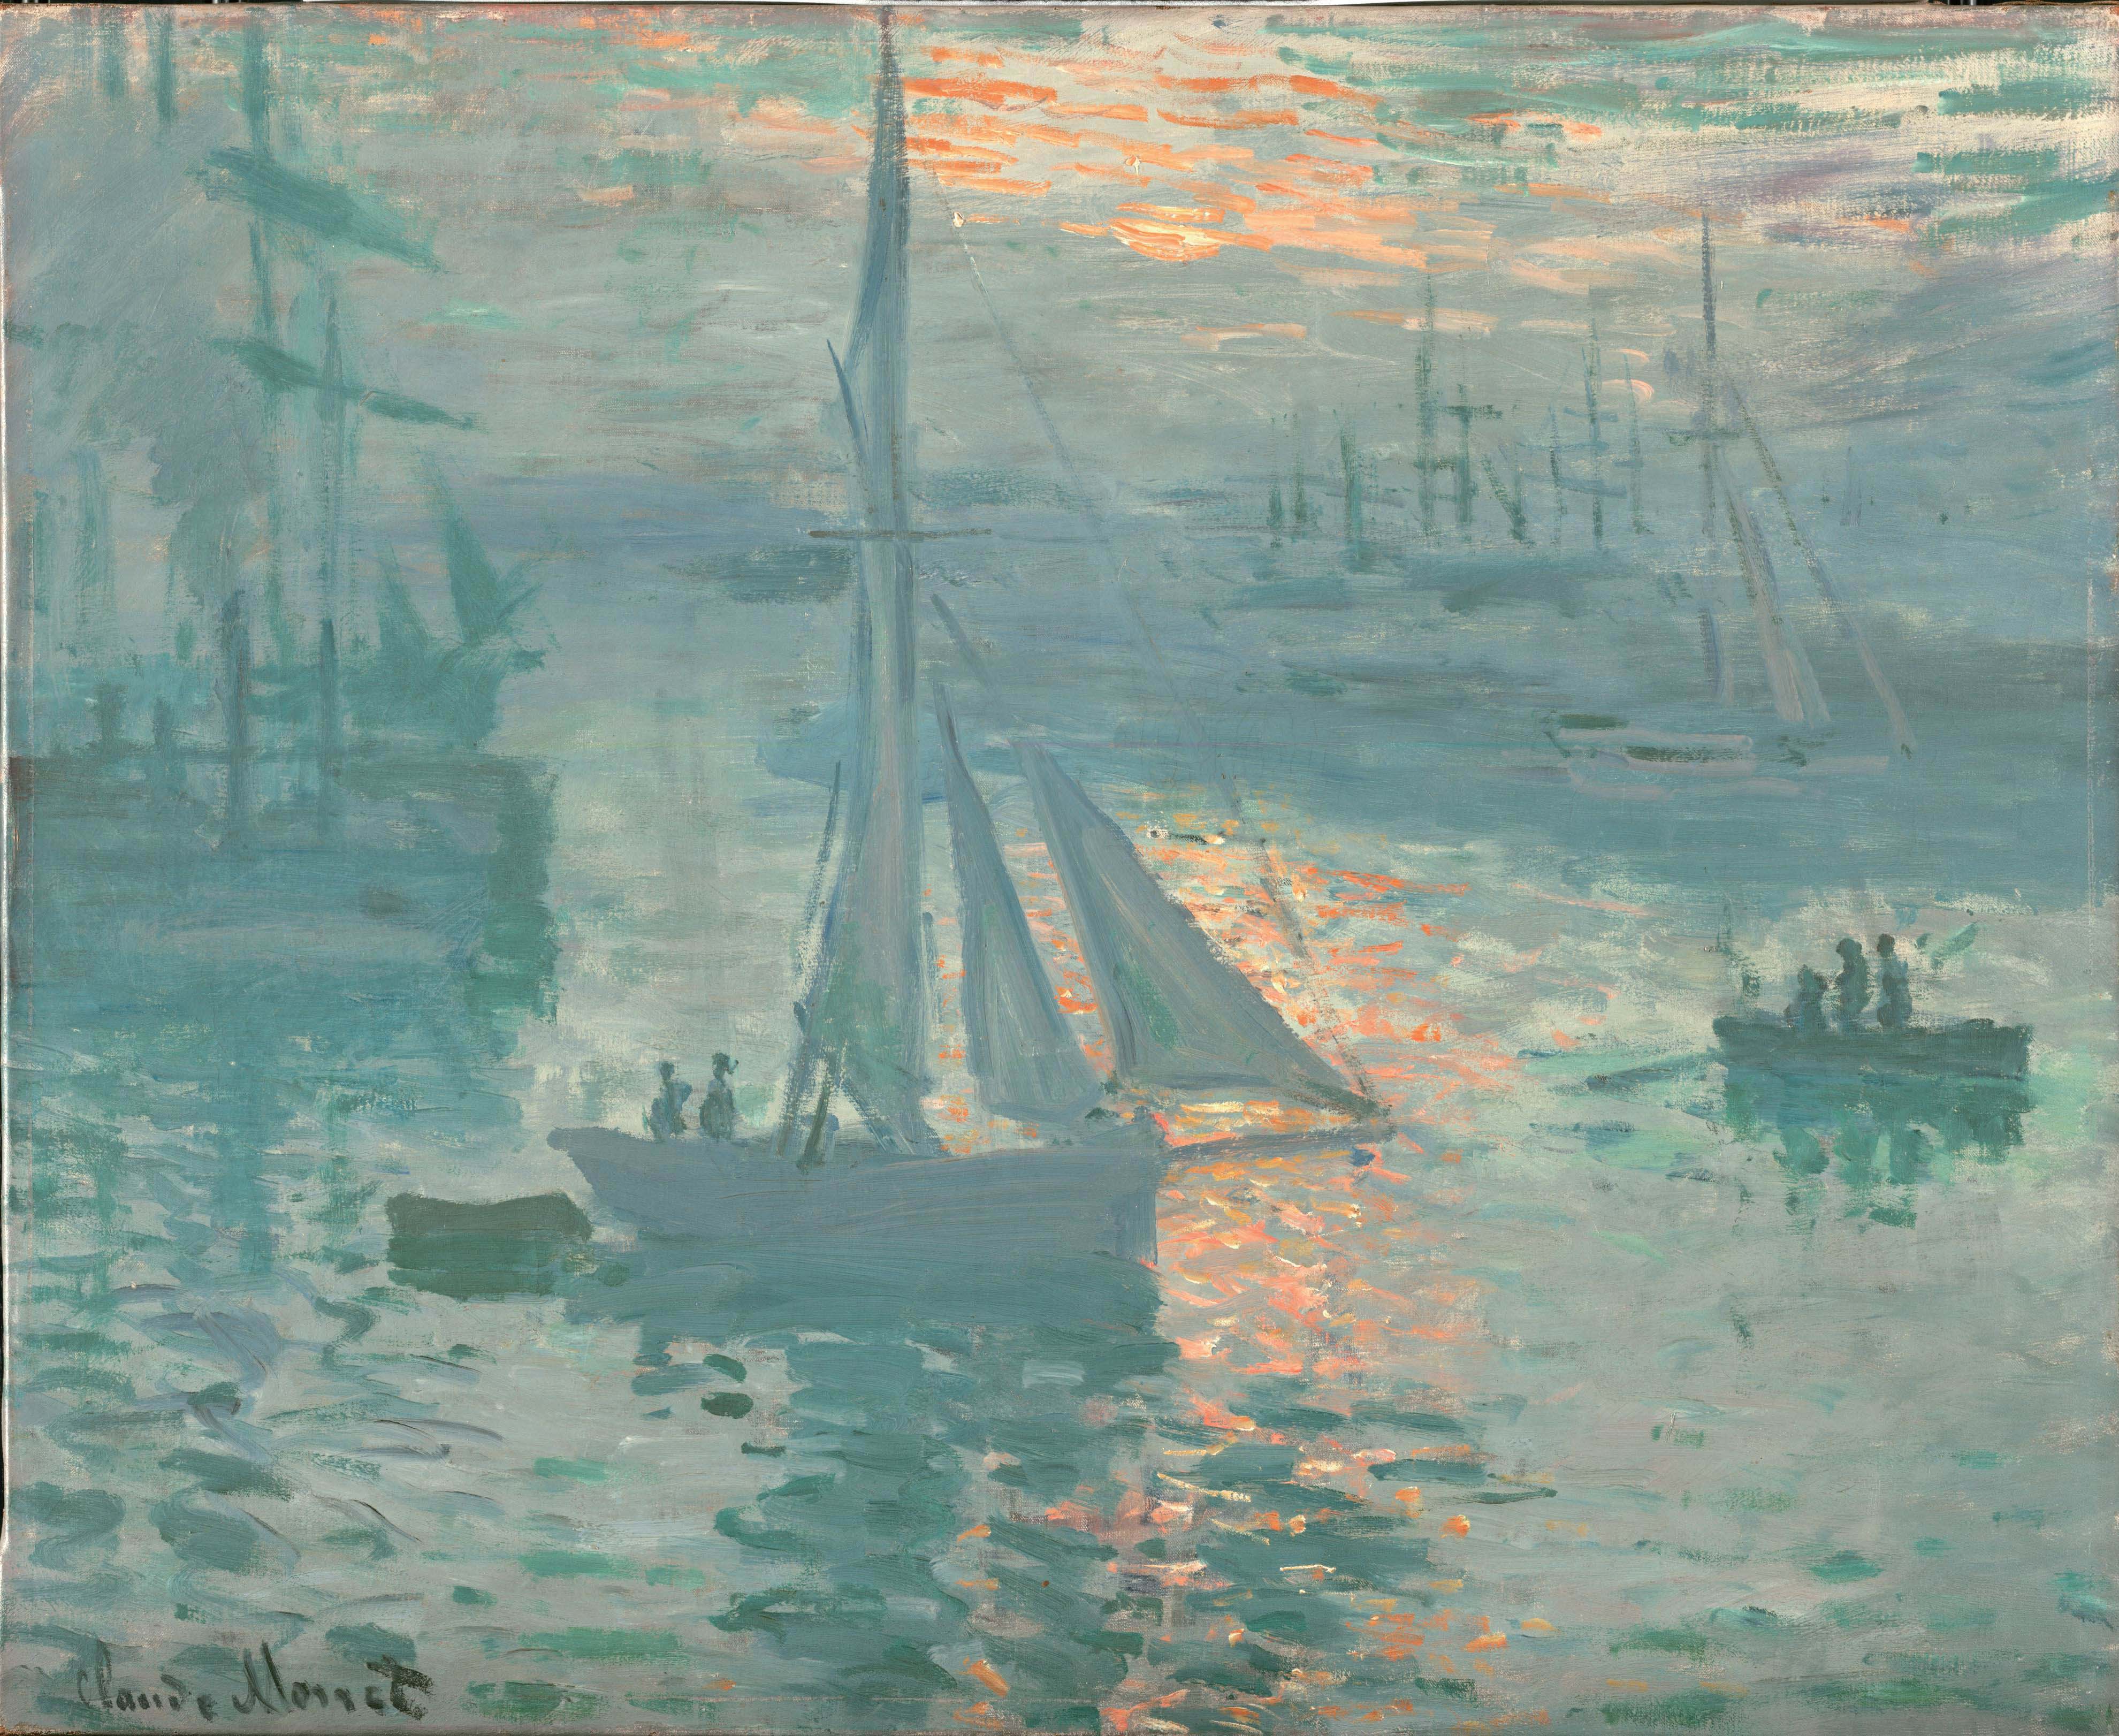 Oil Painting Oil On Canvas Claude Monet Ship Artwork Classical Art Water Clouds Sky 3960x3244